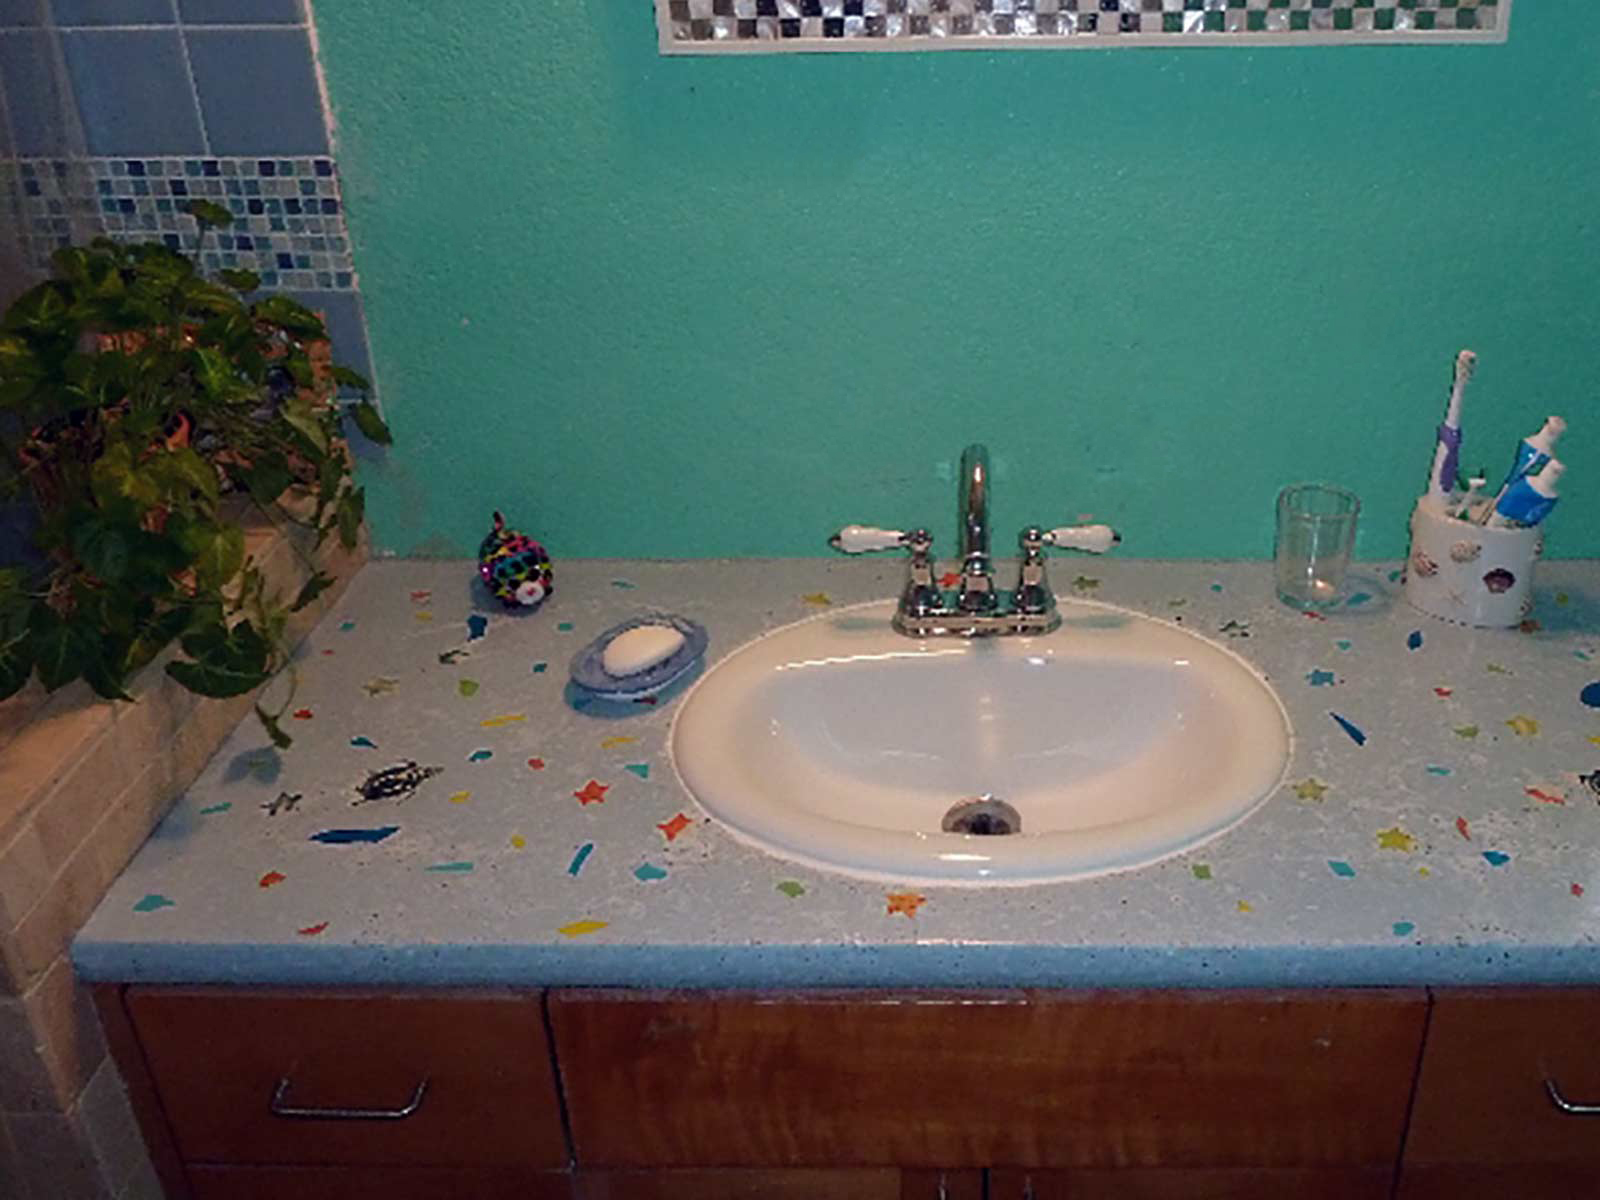 DIY concrete countertop in bathroom with colored glass